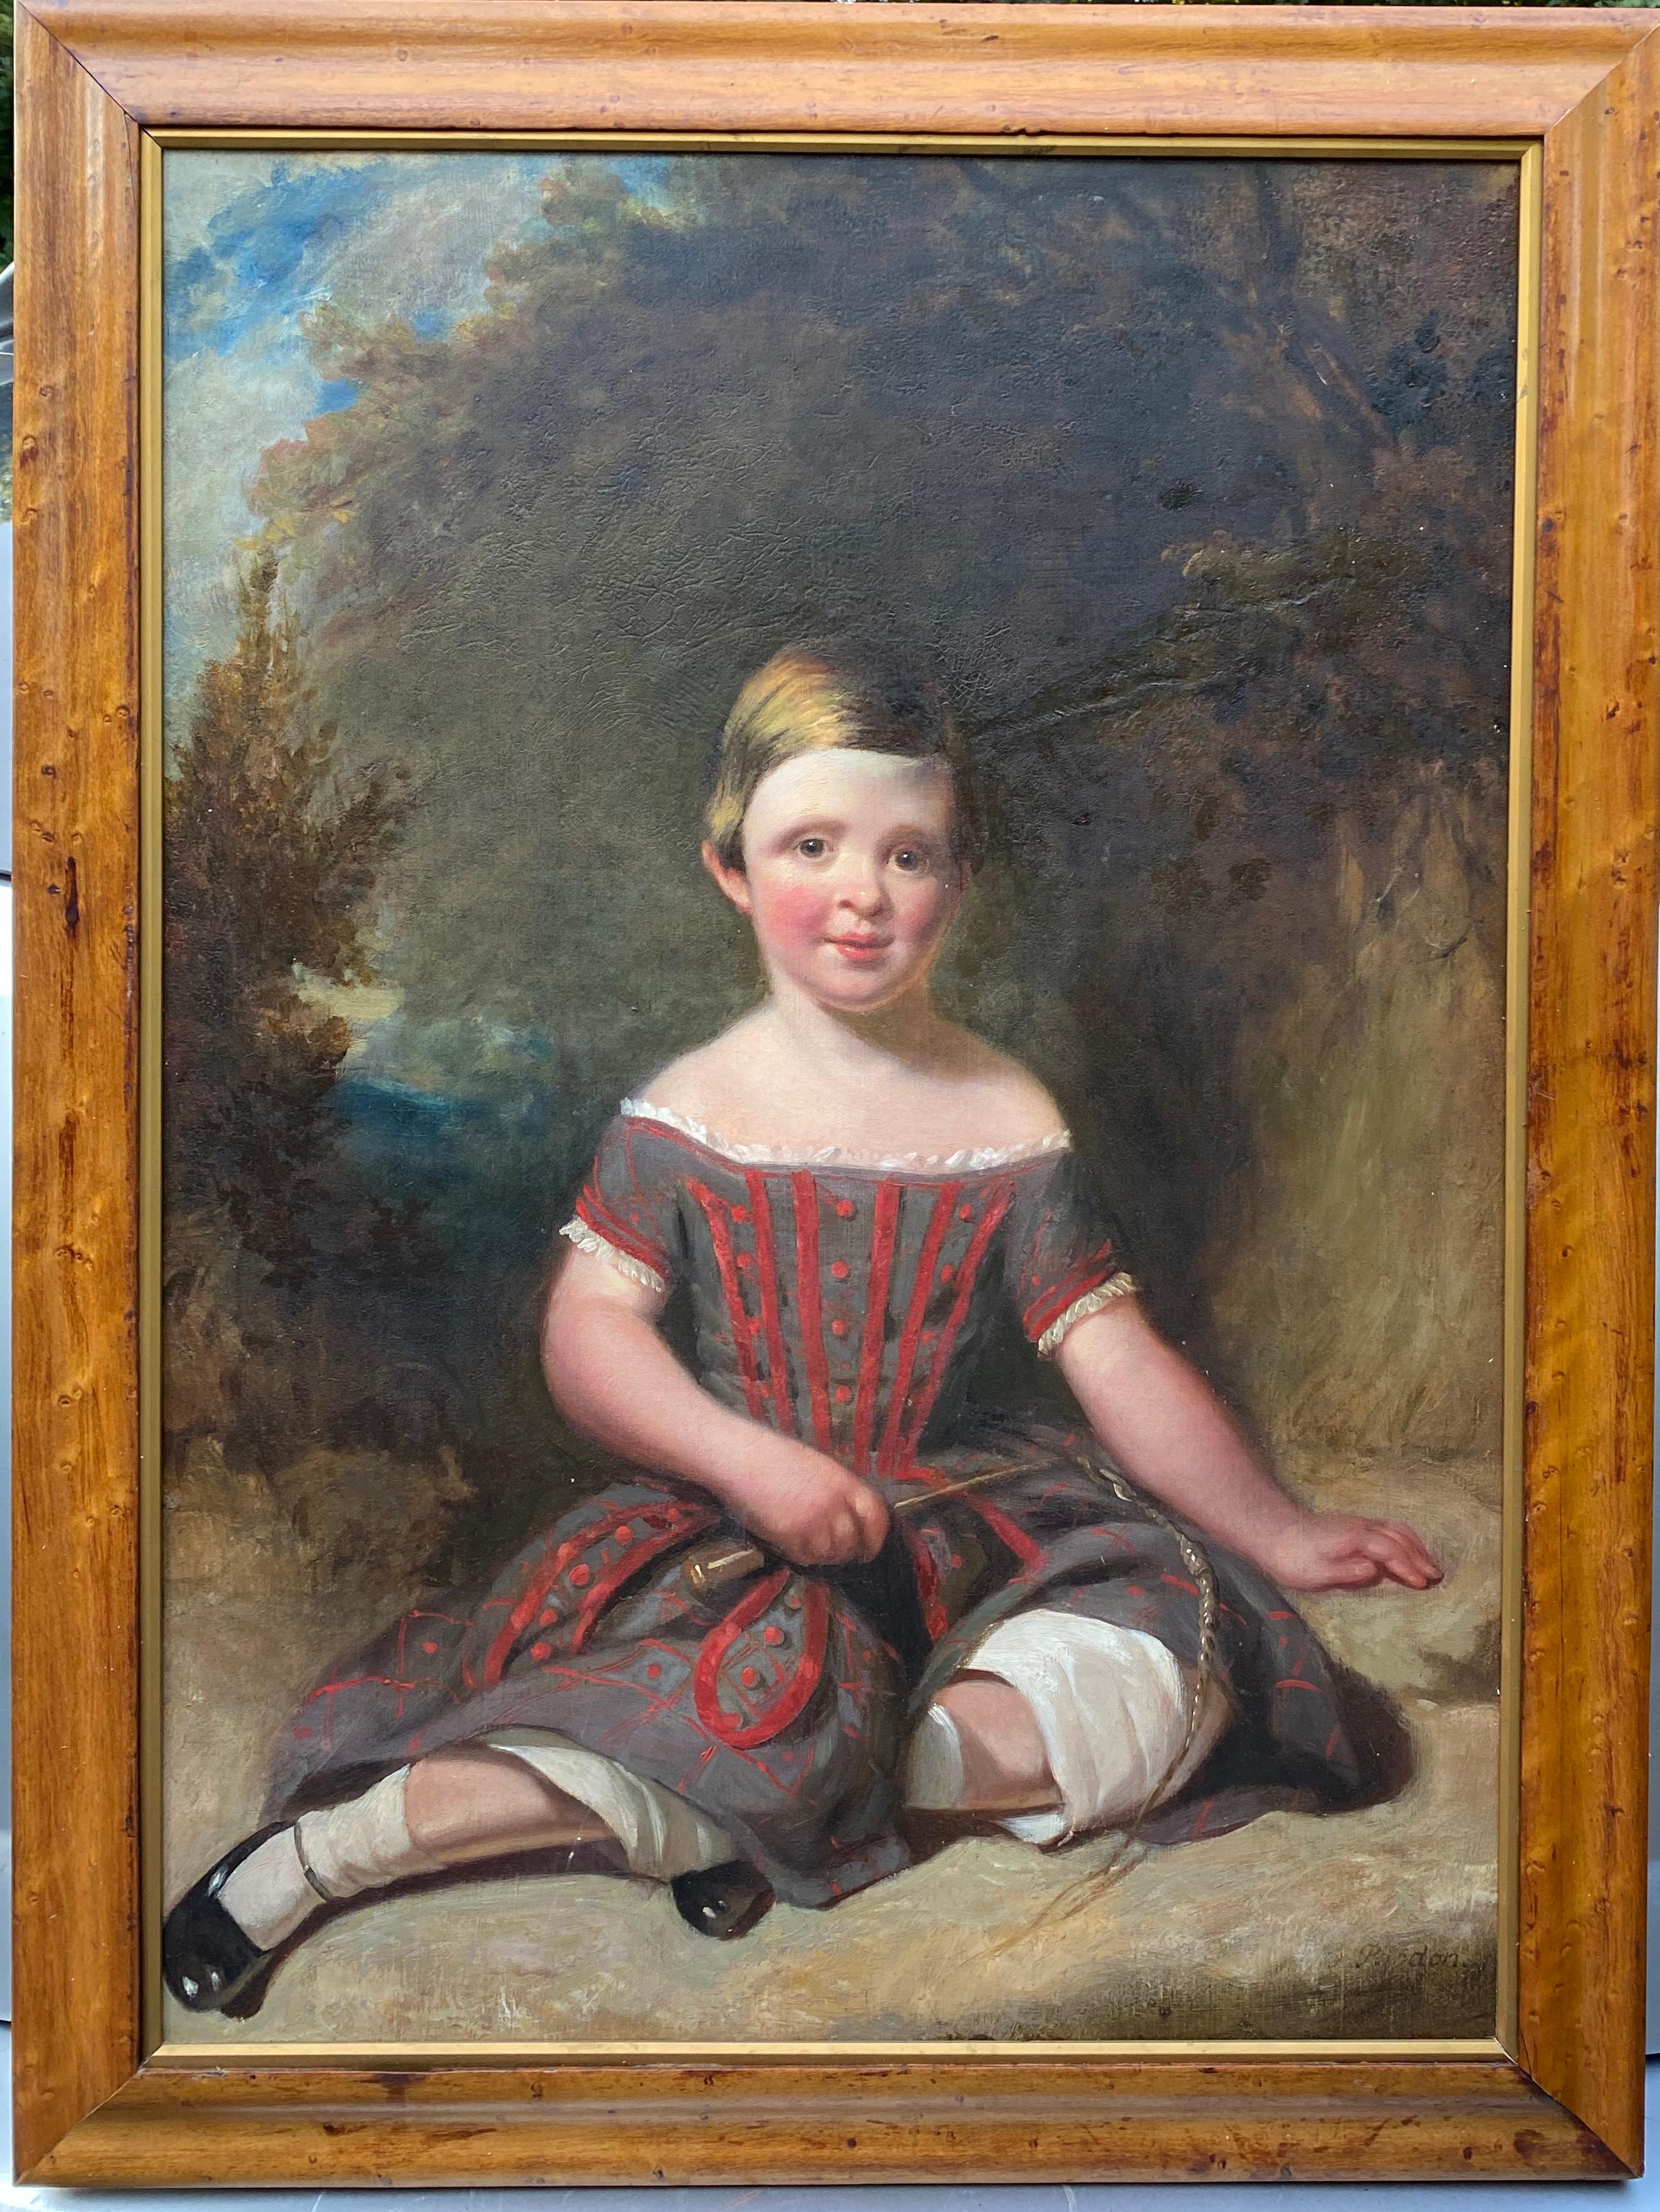 James Pardon Portrait Painting - 19th century English Folk Art Portrait of Young Girl in Red